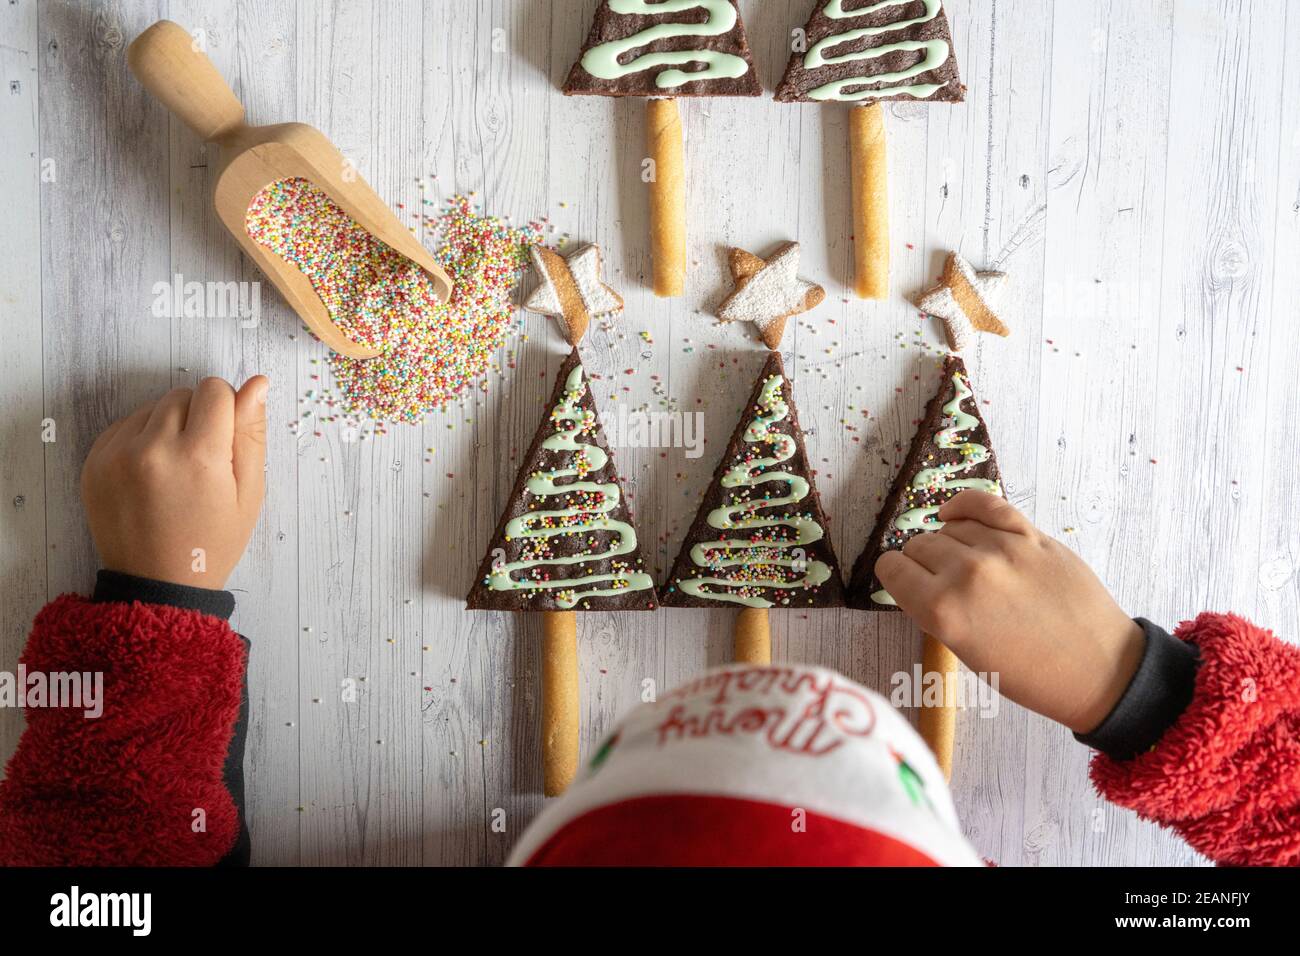 Overhead view of little child with Santa hat decorating the home made chocolate brownies and cookies in shape of Christmas tree, Italy, Europe Stock Photo